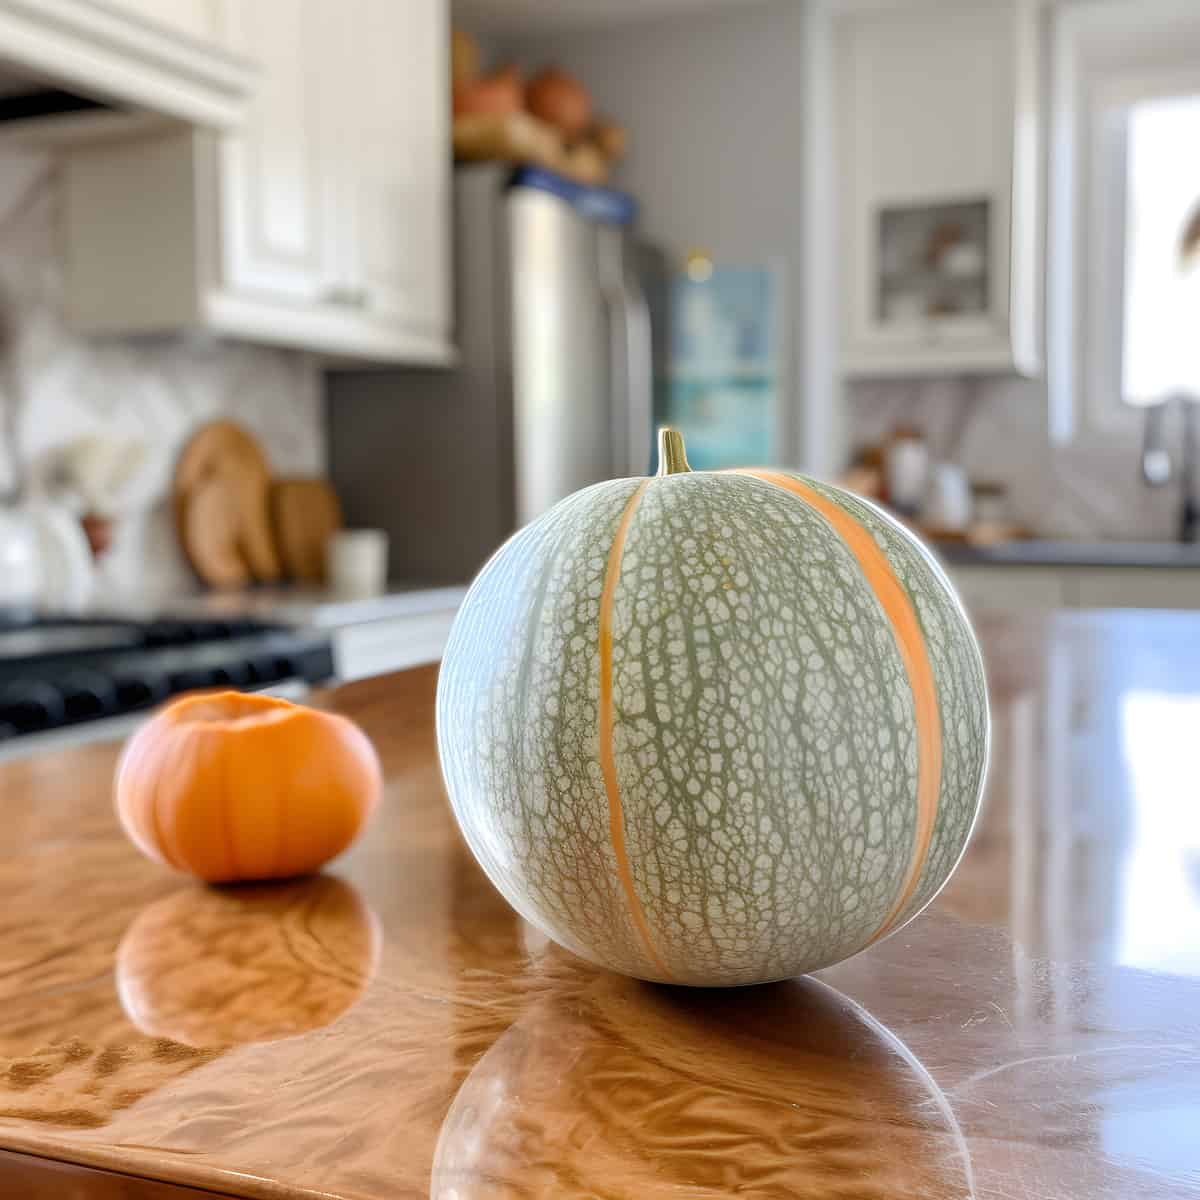 Persian Melon on a kitchen counter